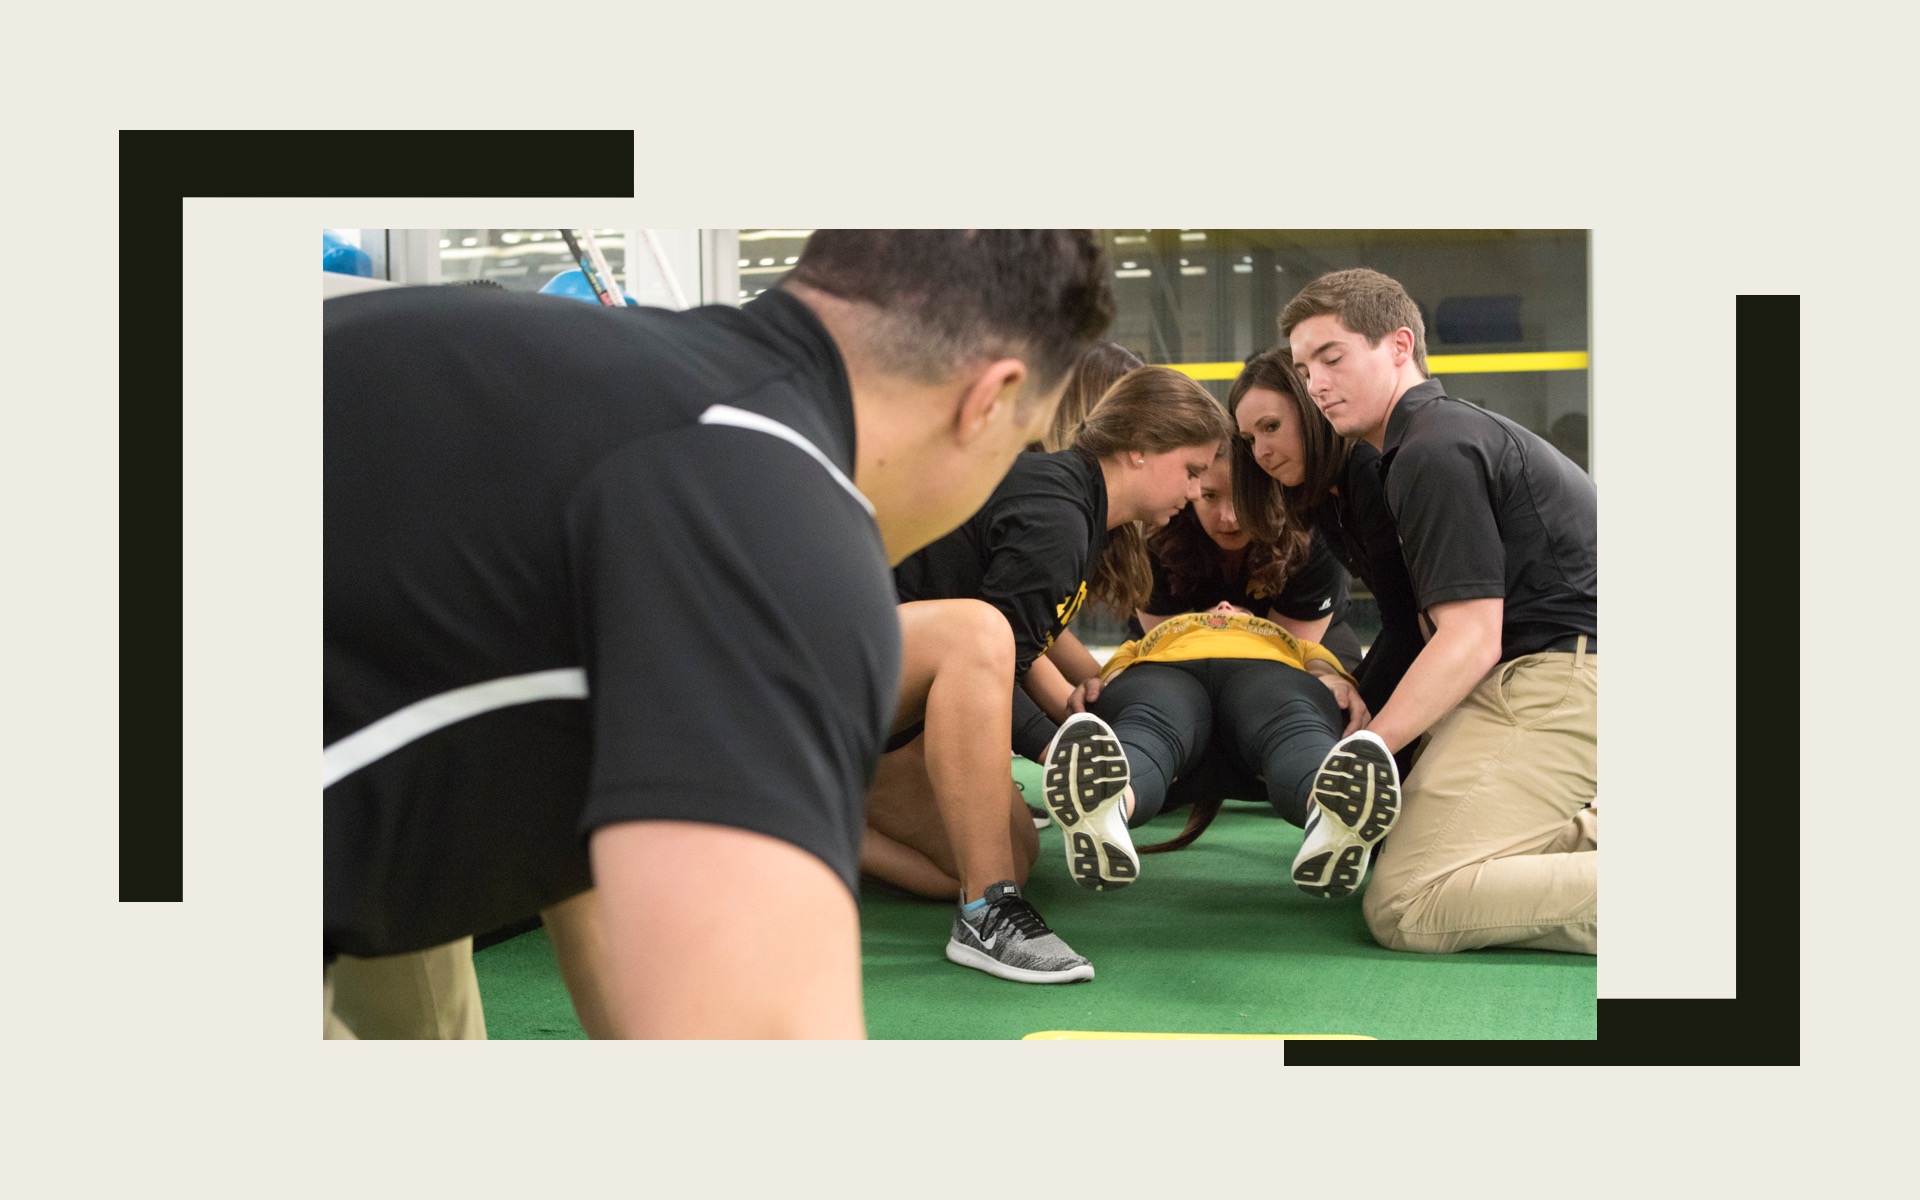 Students and faculty practicing spine boarding lifts